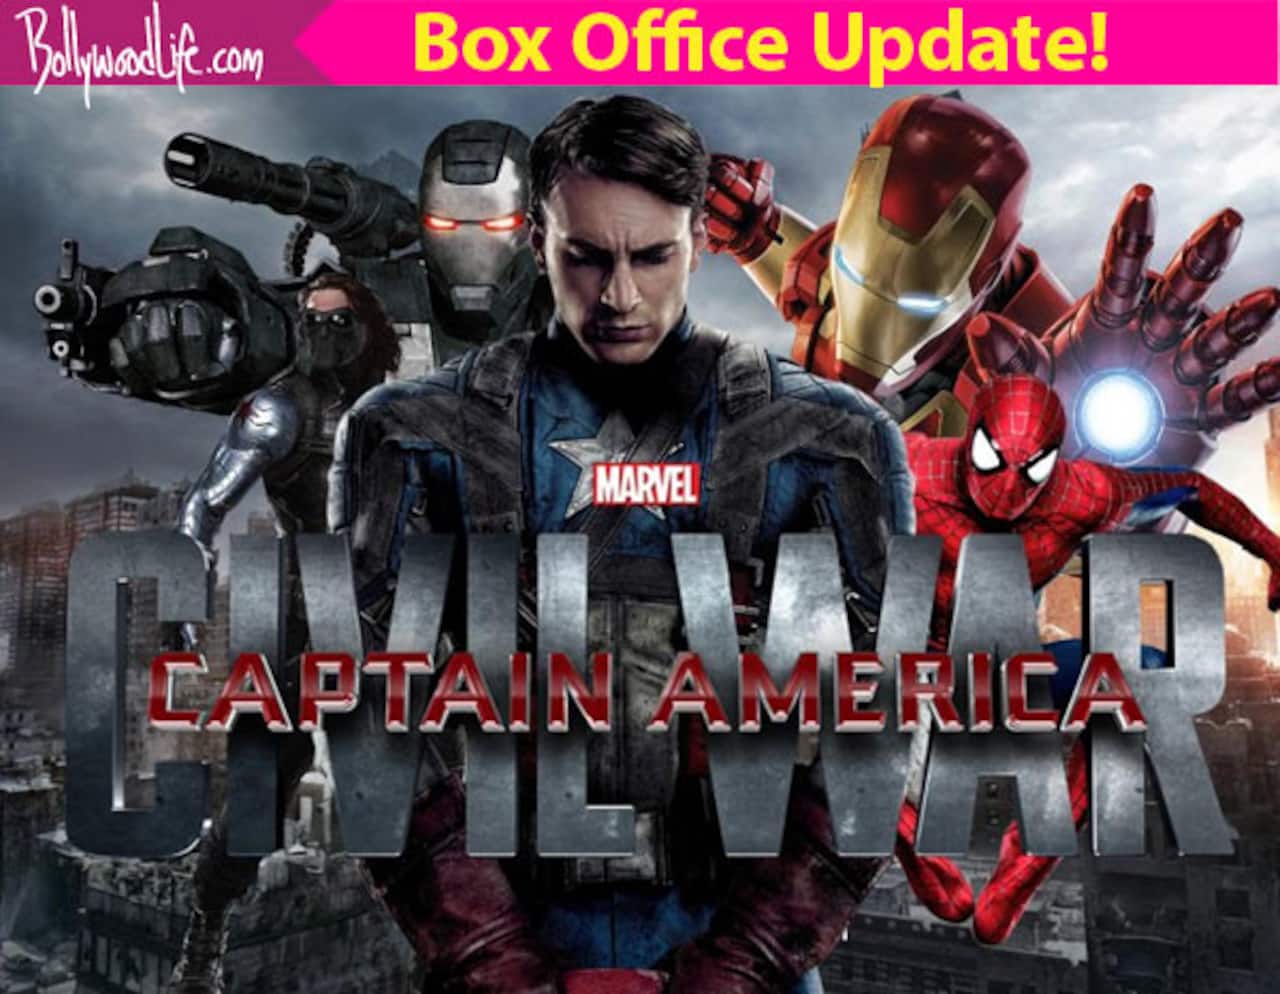 Captain America - Civil War box office collection: Marvel's most  anticipated film rakes in Rs  crores gross on day 1! - Bollywood News  & Gossip, Movie Reviews, Trailers & Videos at 